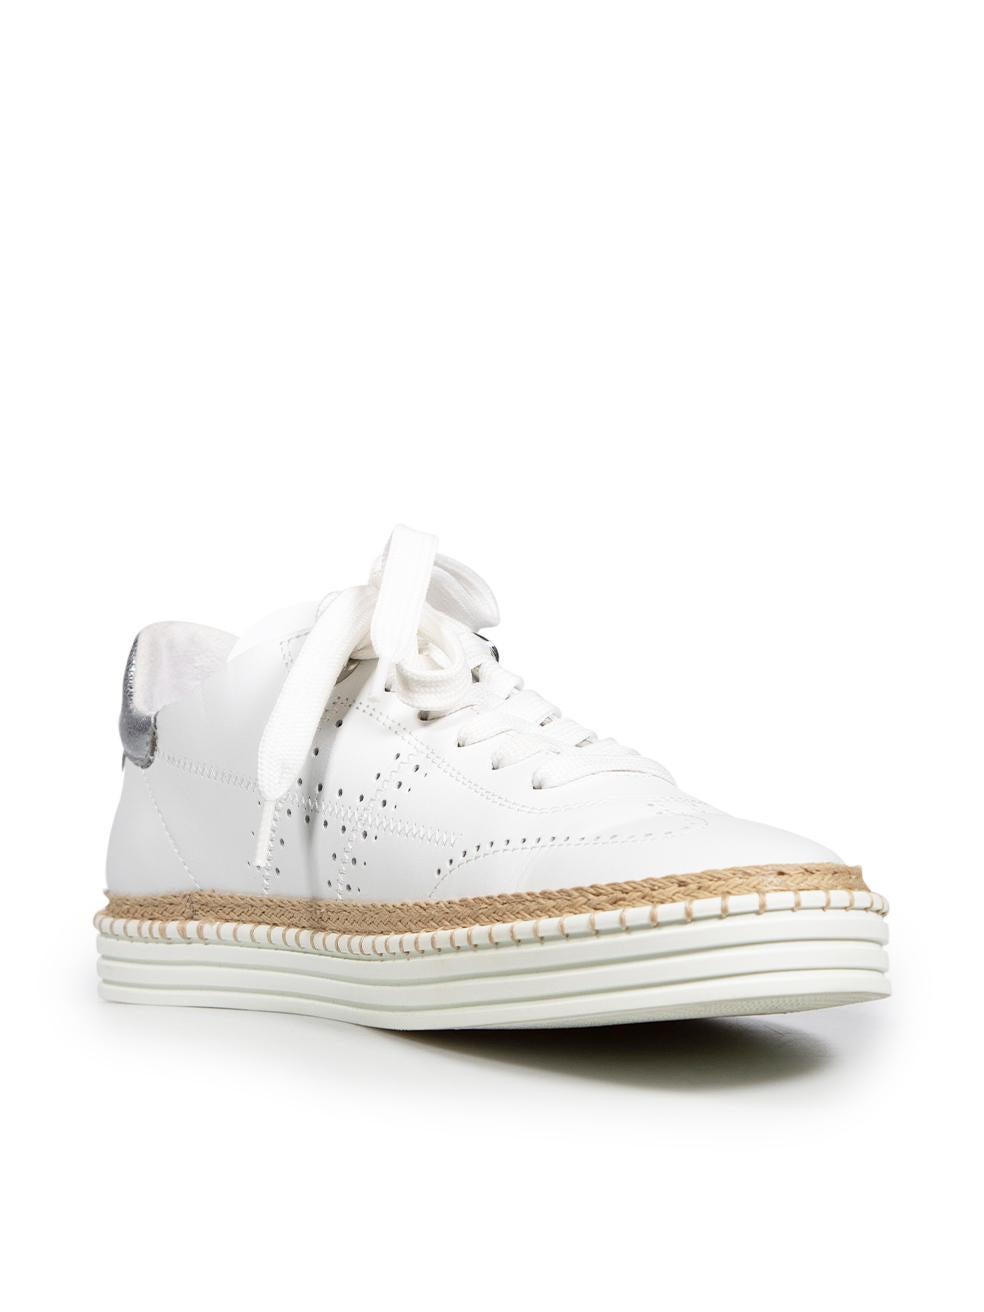 CONDITION is Very good. Minimal wear to trainers is evident. Minimal wear to the uppers with light creasing over the toes and a negligible discoloured mark on the laces of this used Hogan designer resale item.
 
 Details
 R260
 White
 Leather
